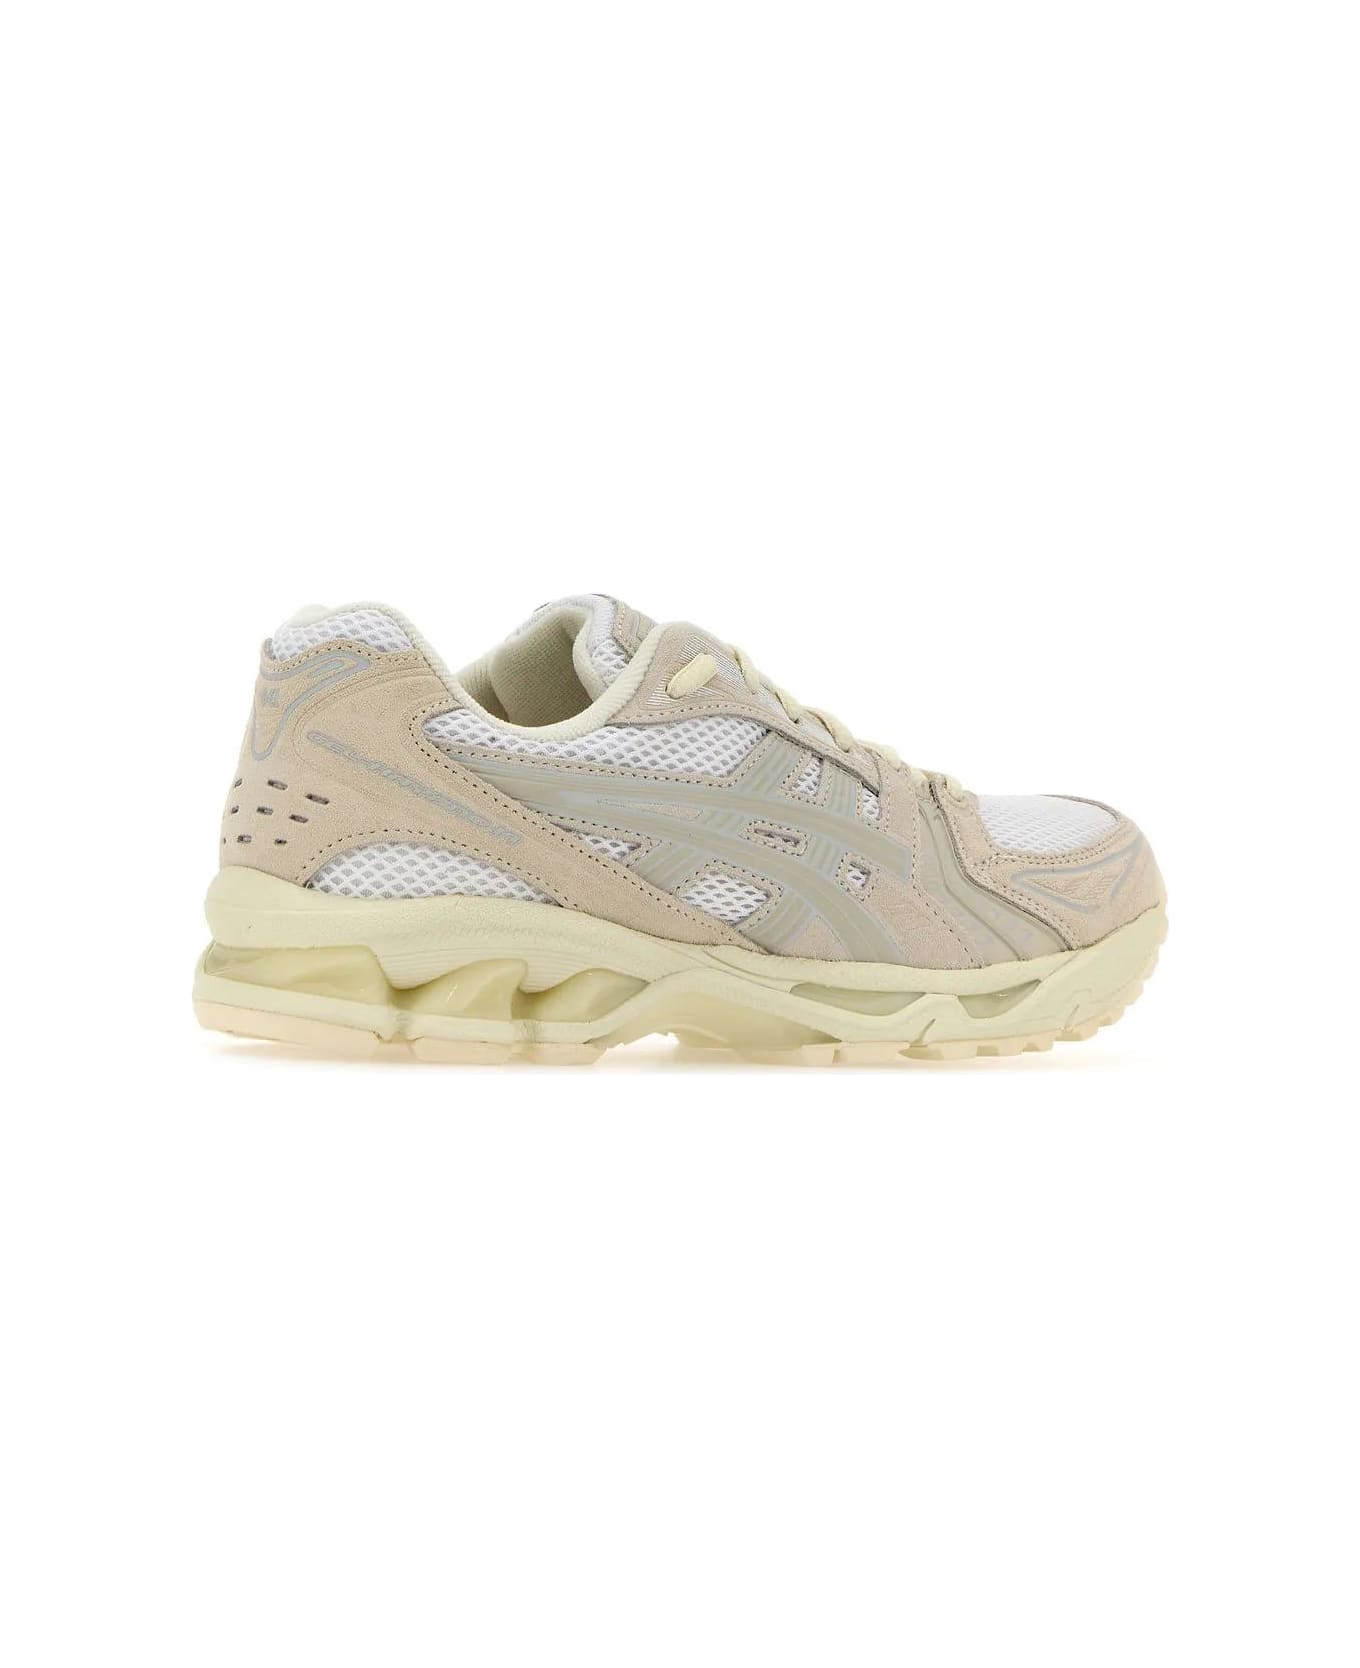 Asics Two-tone Mesh And Suede Gel-kayano 14 Sneakers - WHITE スニーカー